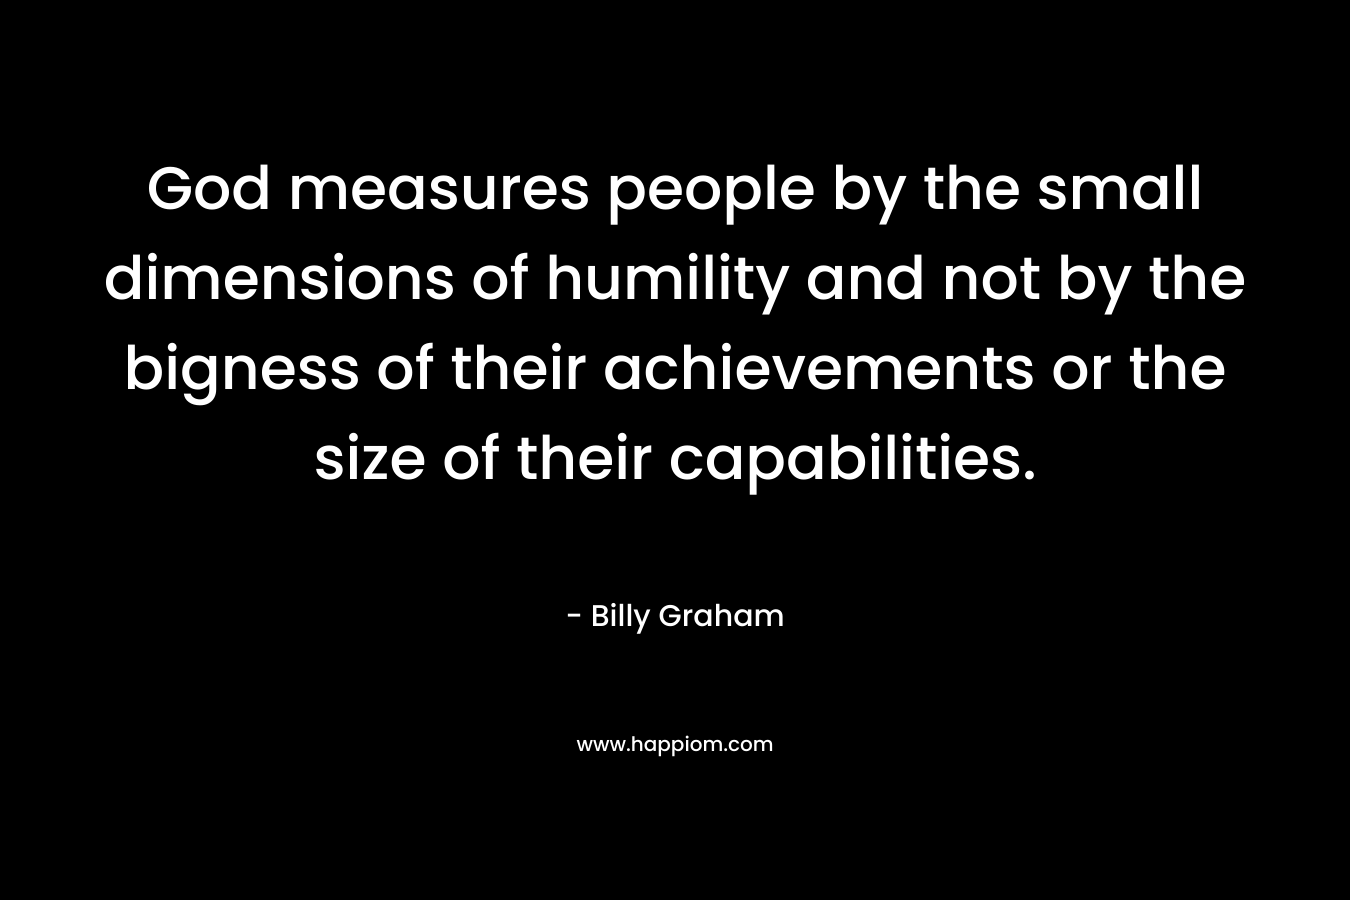 God measures people by the small dimensions of humility and not by the bigness of their achievements or the size of their capabilities. – Billy Graham